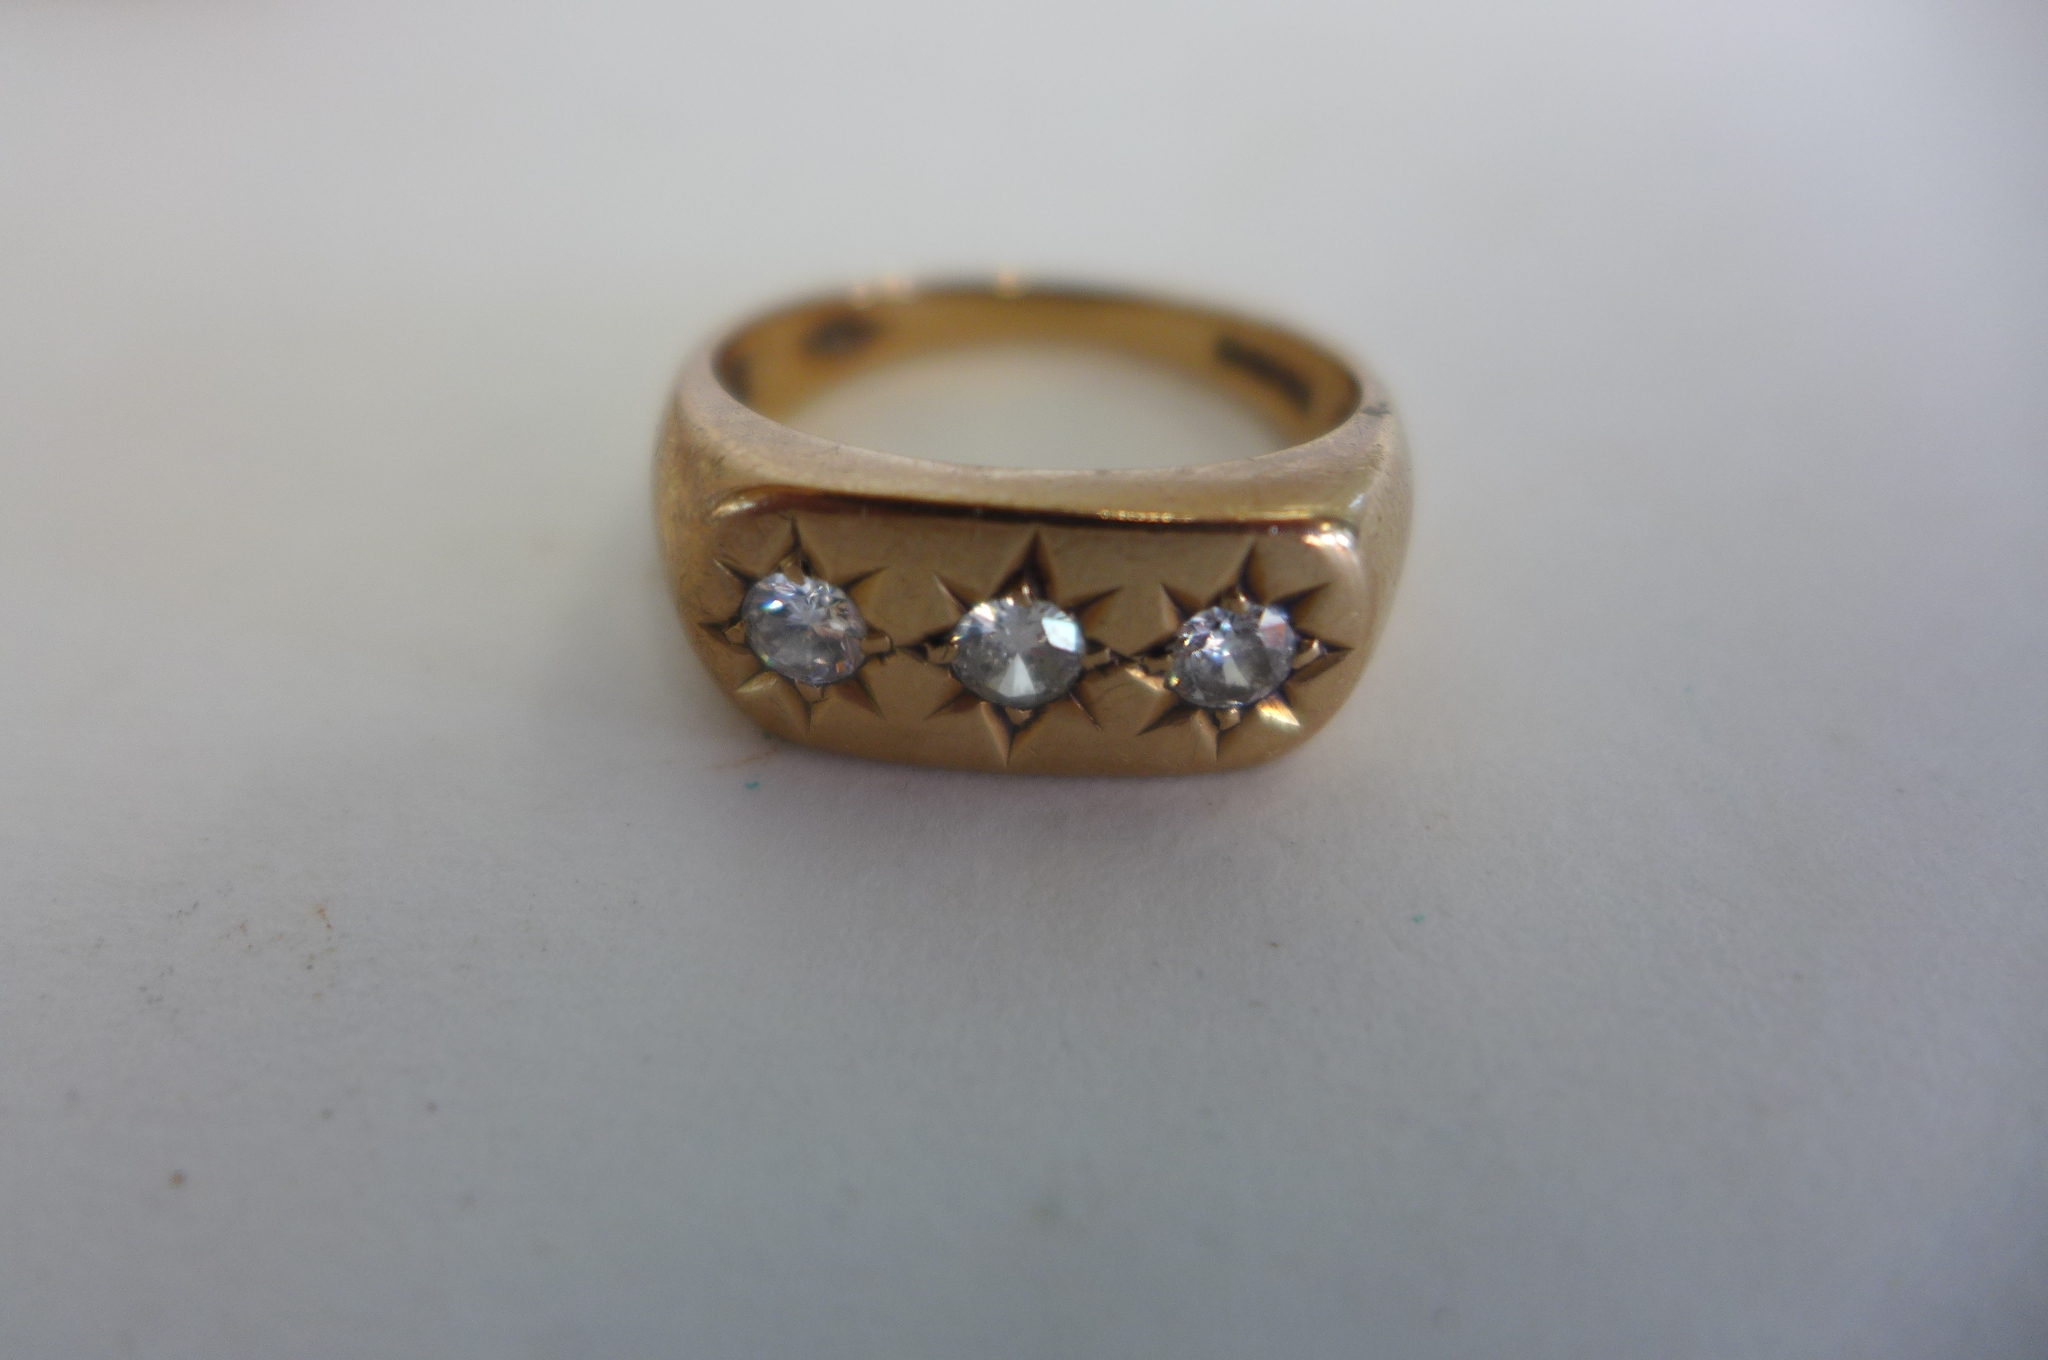 A 9ct gold three stone diamond ring, size T, approx 5.7 grams, some usage marks, diamonds bright